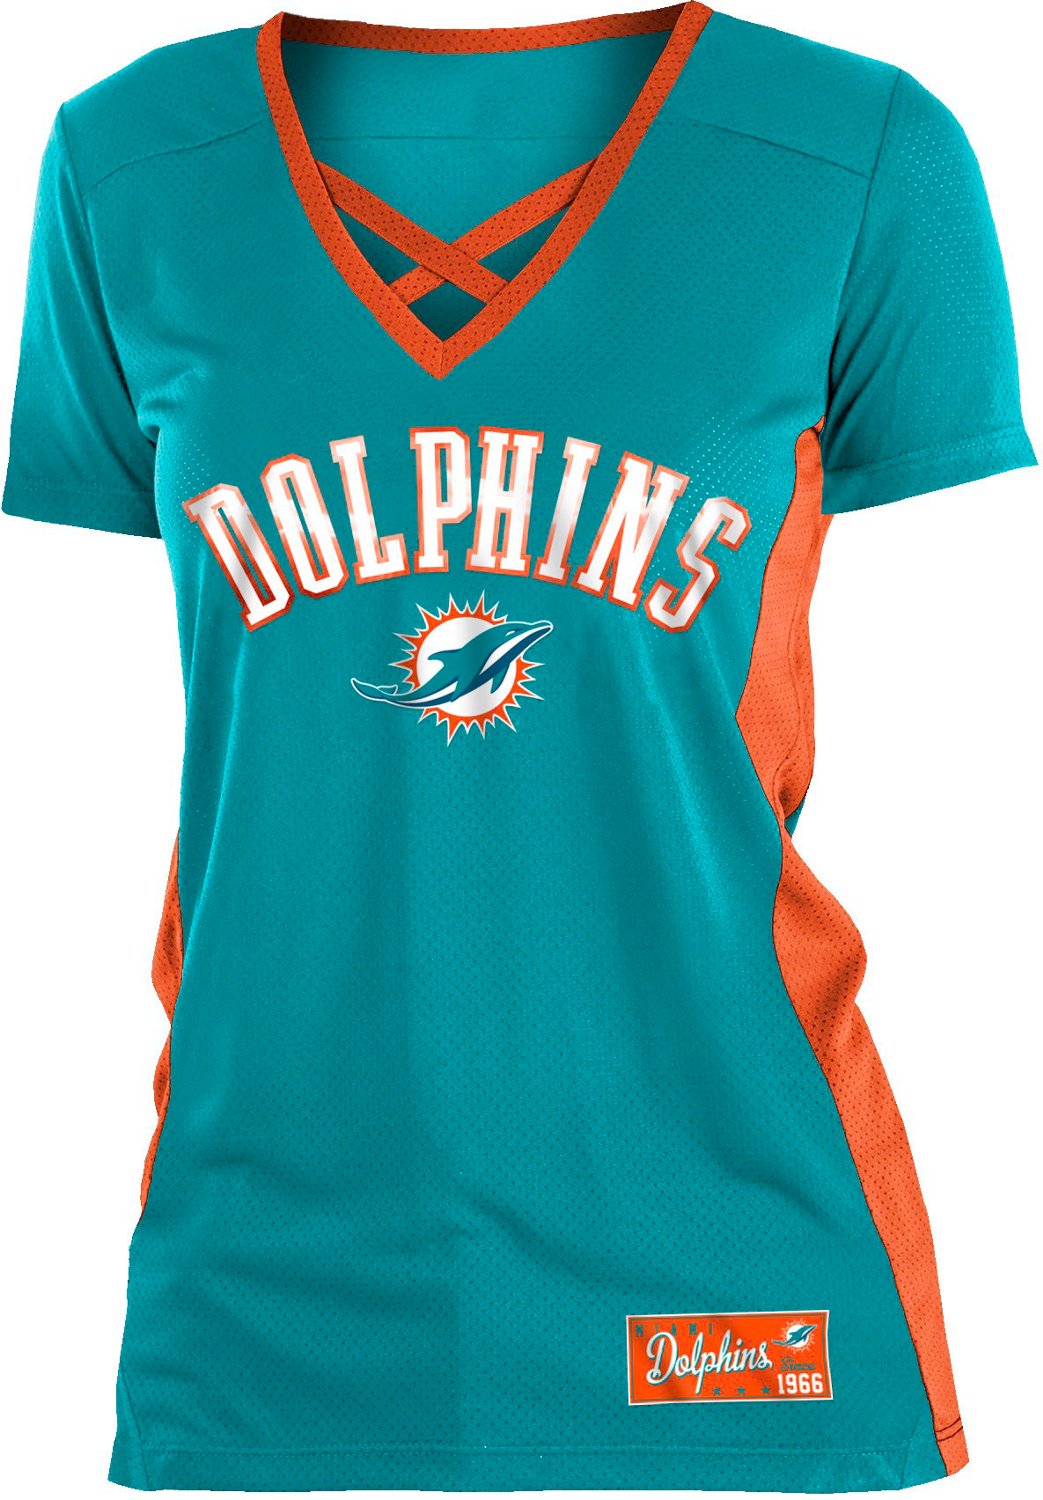 5th & Ocean Clothing Women's Miami Dolphins Poly Mesh